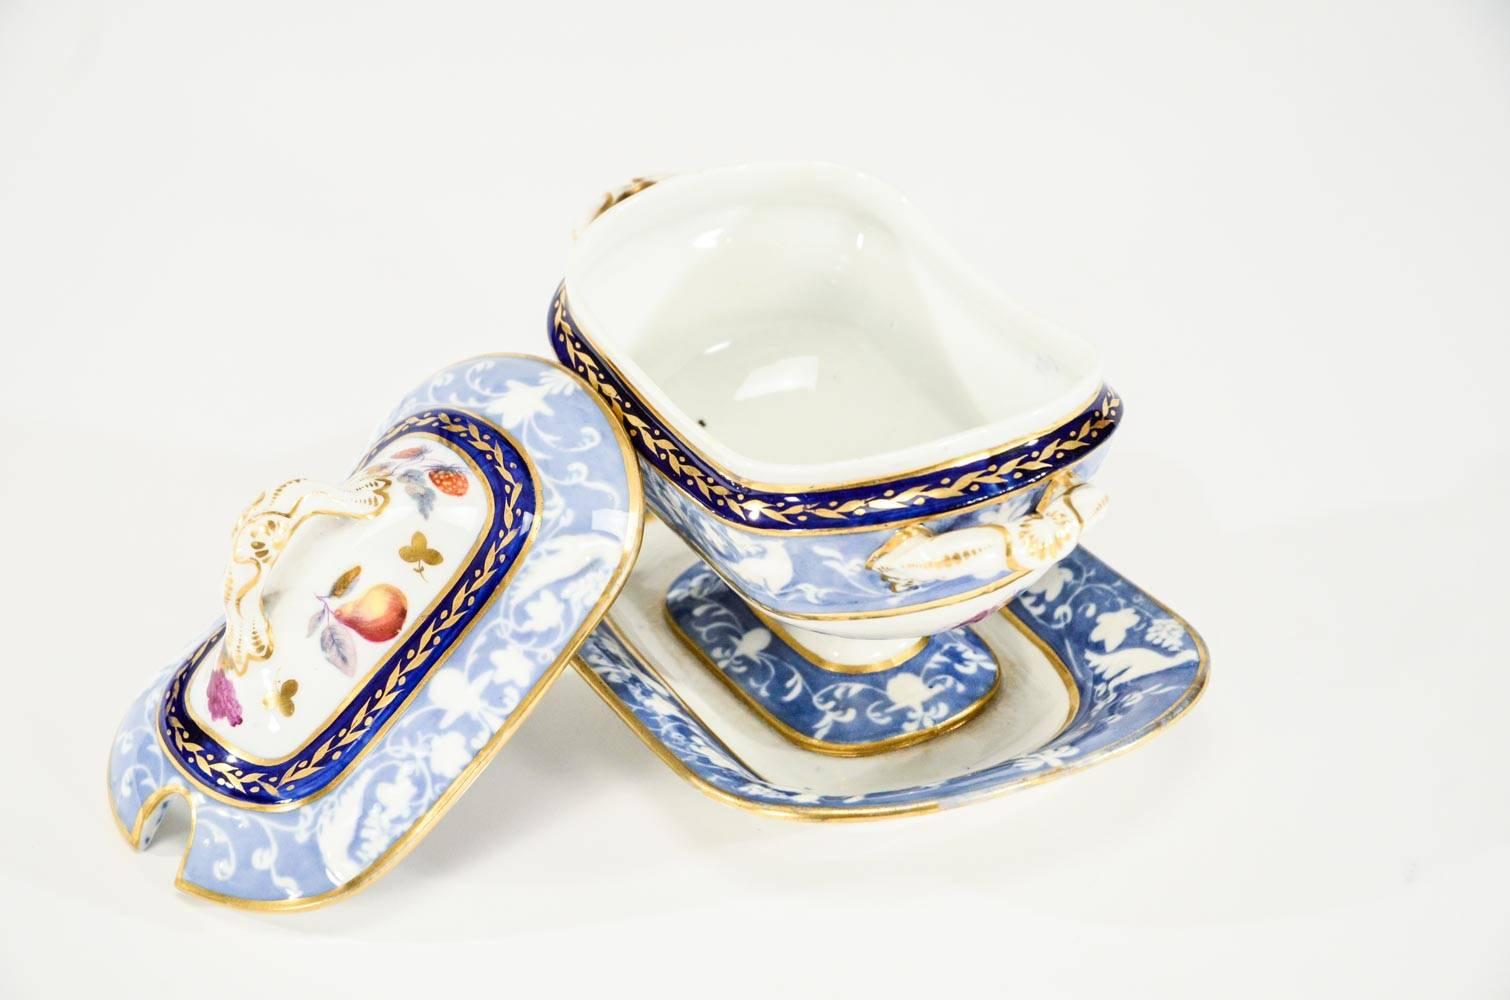 Pair of 19th Century Hand-Painted Spode Sauce Tureens For Sale 1